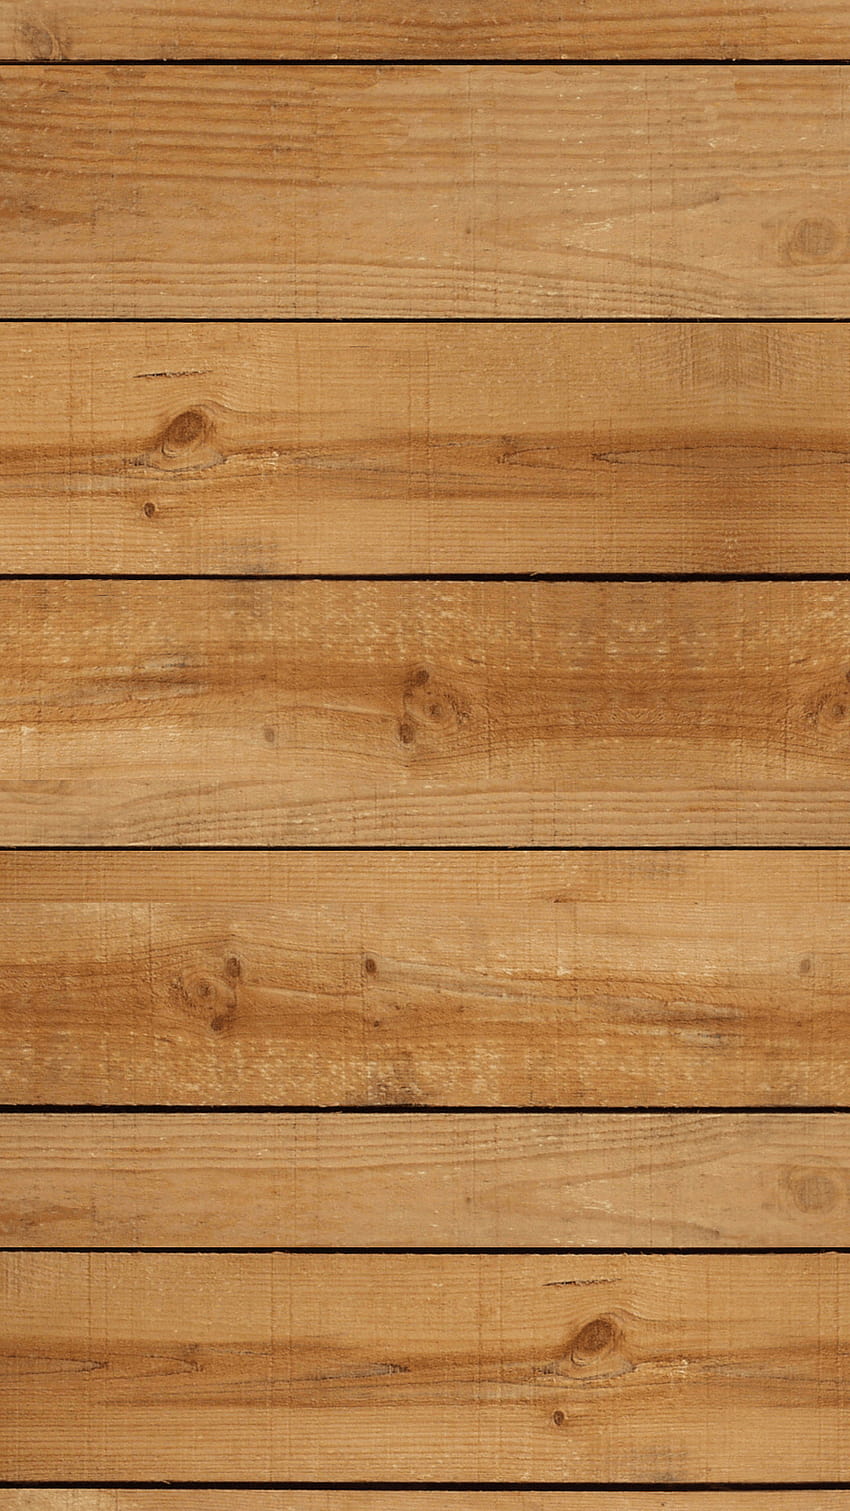 Android Wood Panels backgrounds, android logo wooden HD phone wallpaper